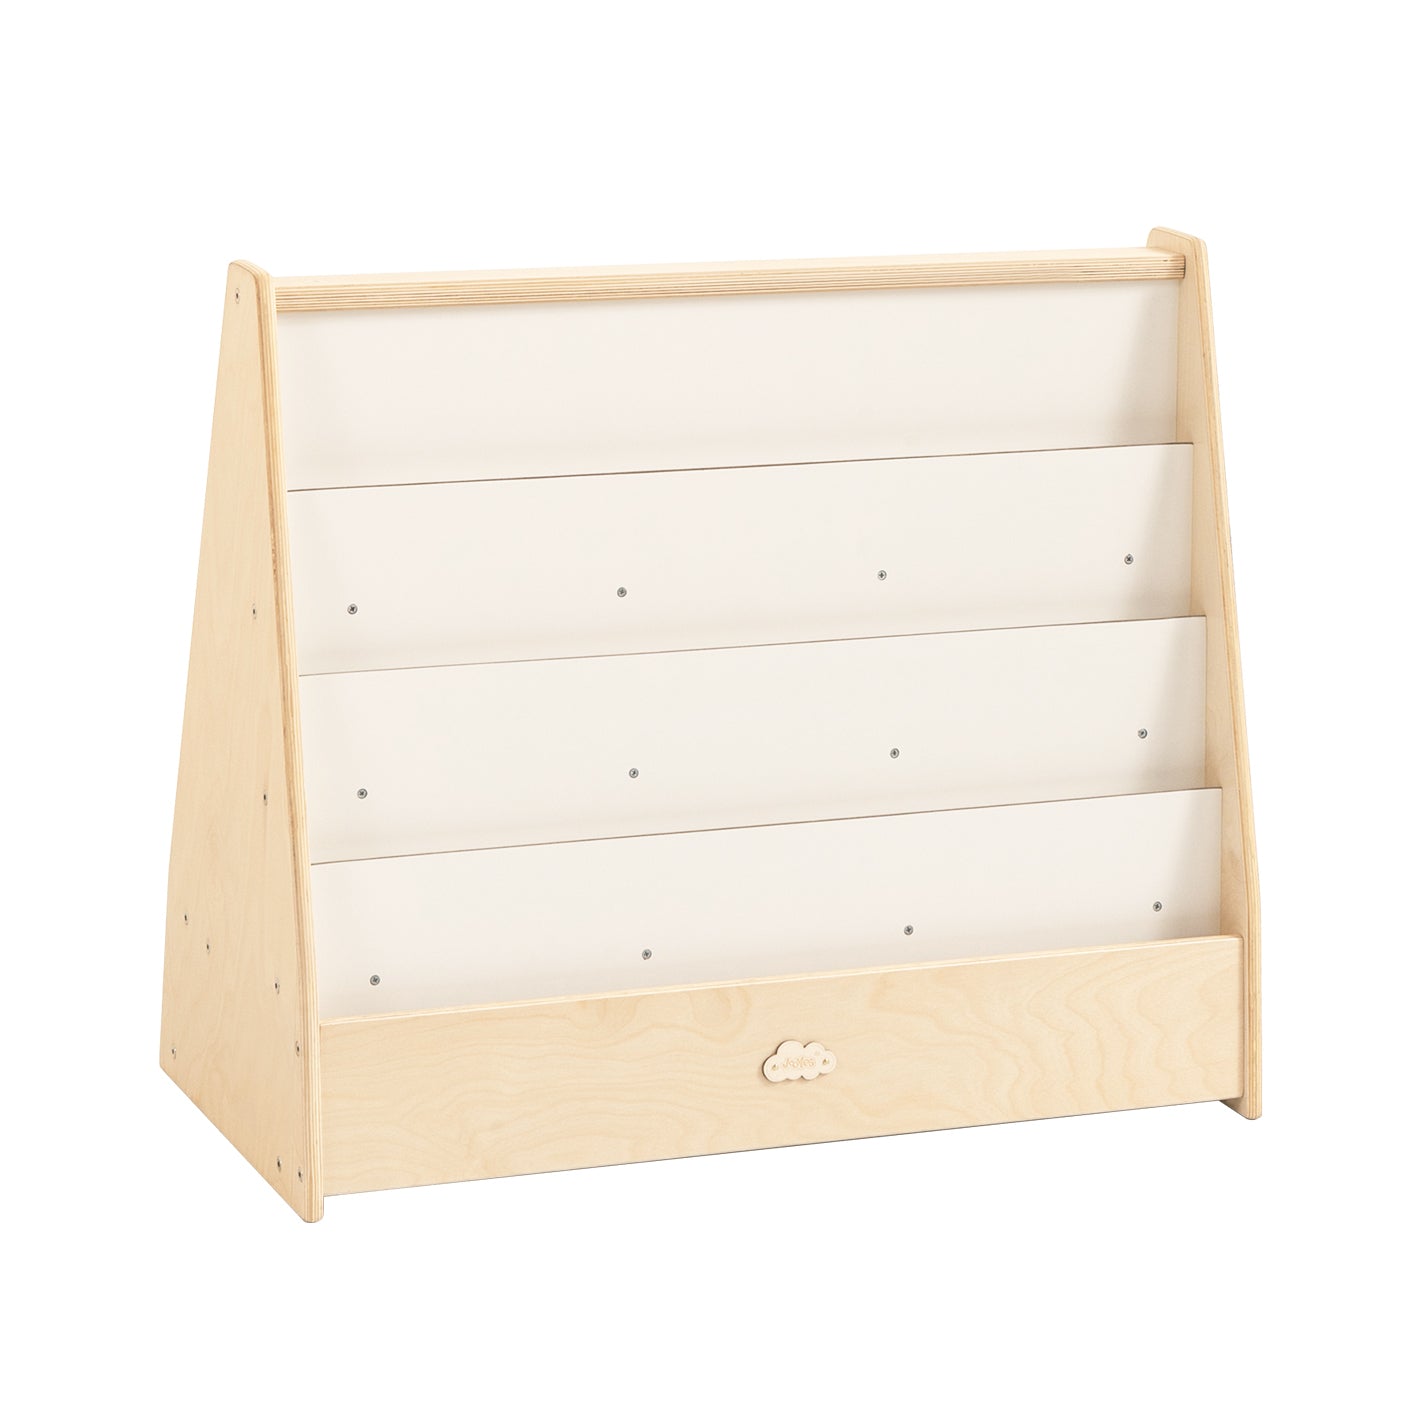 Jooyes Kids 4 Tier Wooden Display Bookcase With White Board And Storage